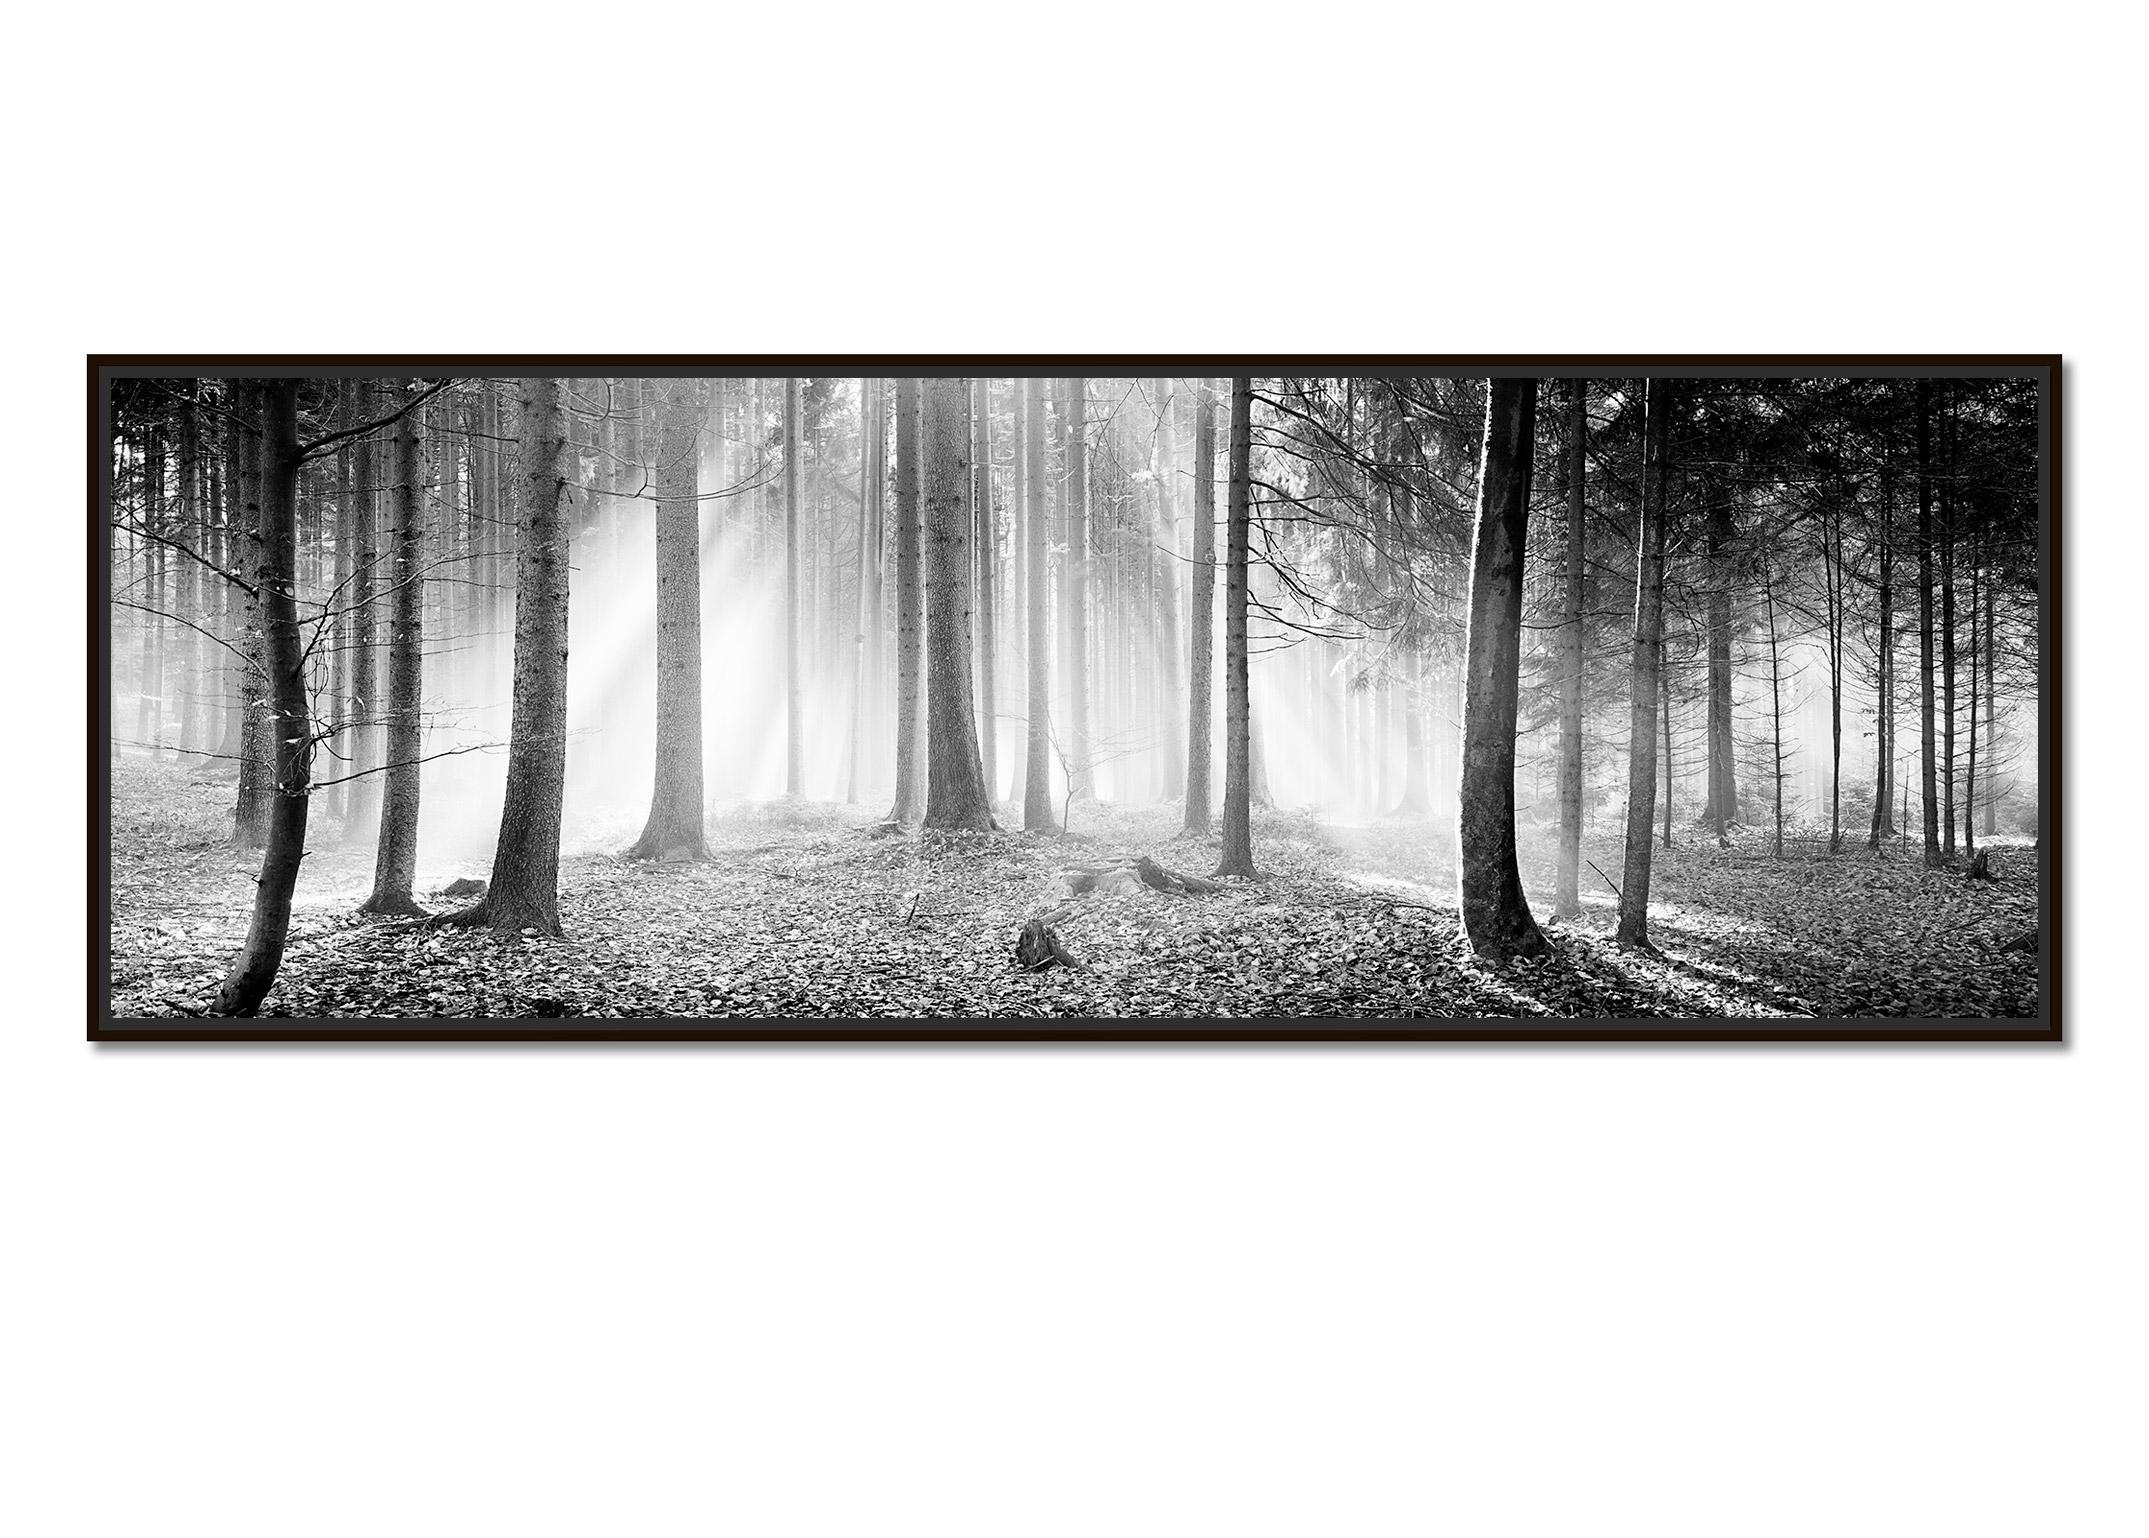 Enchanted Forest foggy sunny morning Austria black white landscape photography - Photograph by Gerald Berghammer, Ina Forstinger